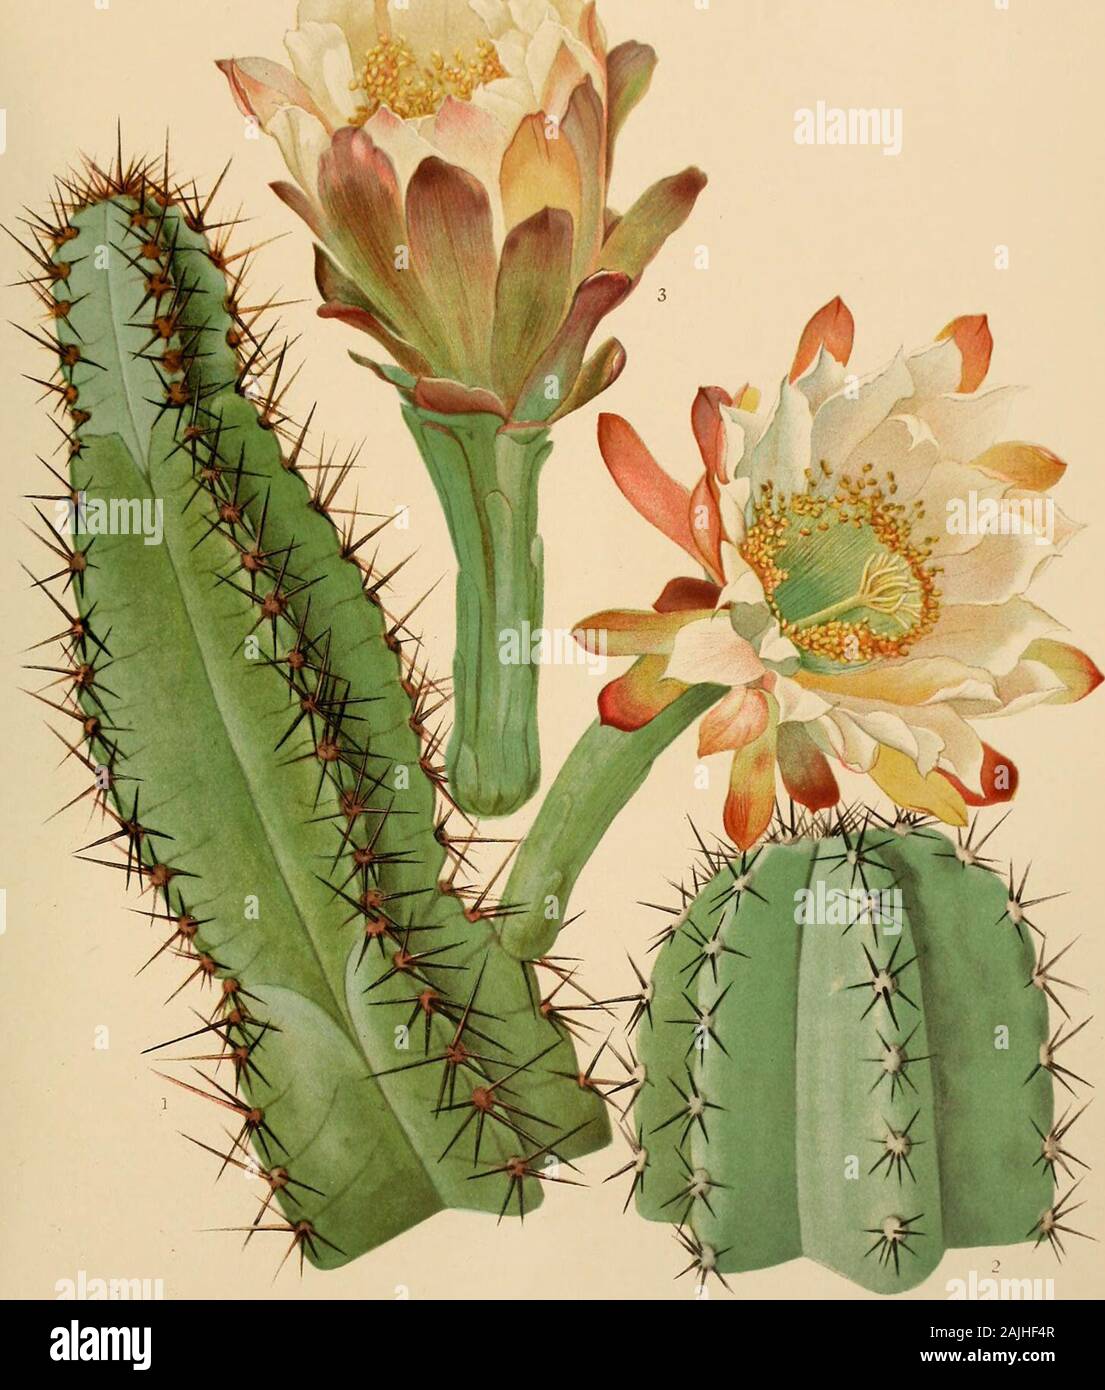 The Cactaceae : descriptions and illustrations of plants of the cactus family . amtb. Kakteen 115. 1897. Cereus paraguayensis Schumann in Chodat and Hassler, Bull. Herb. Boiss. II. 3: 249. 1903. Stems up to 2 meters high; ribs mostly 5, strongly compressed, 3 cm. high, separated by deepsharp intervals, rounded on the edge; areoles 2 to 2.5 cm. apart, when young filled with white wool;spines 6 to 9, all spreading, when young golden yellow, but gray when older, red at the bases, subu-late, 2.5 cm. long; flowers 21 to 22 cm. long, 10 cm. broad at mouth; outer perianth-segmentsnarrow, 1 cm. wide o Stock Photo